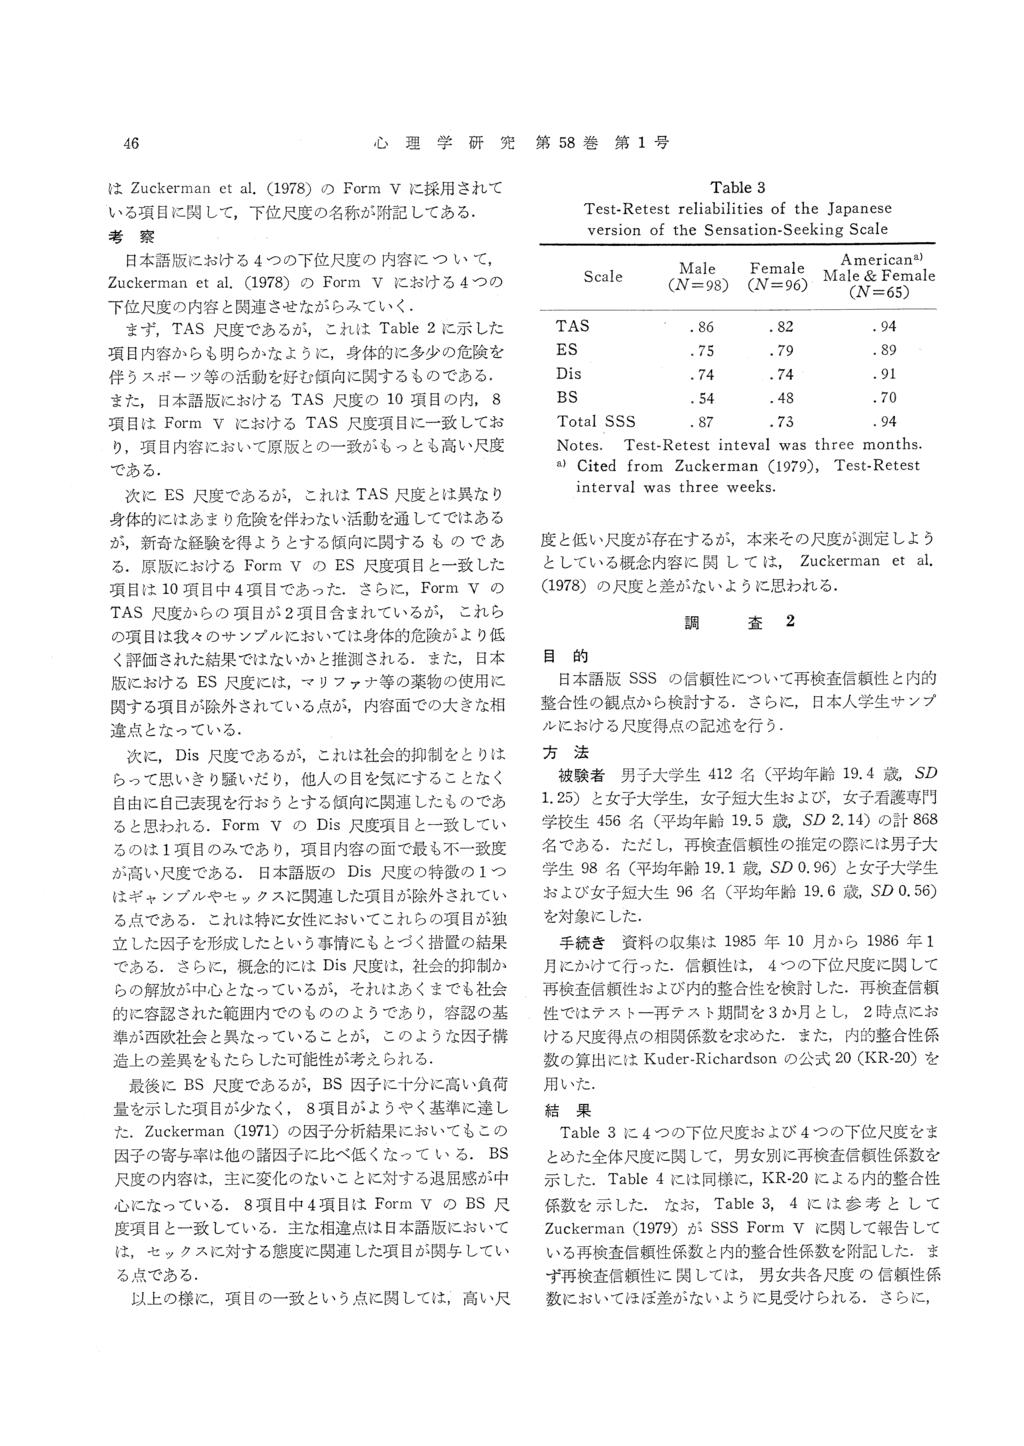 Table 3 Test-Retest reliabilities of the Japanese version of the Sensation-Seeking Scale Notes.